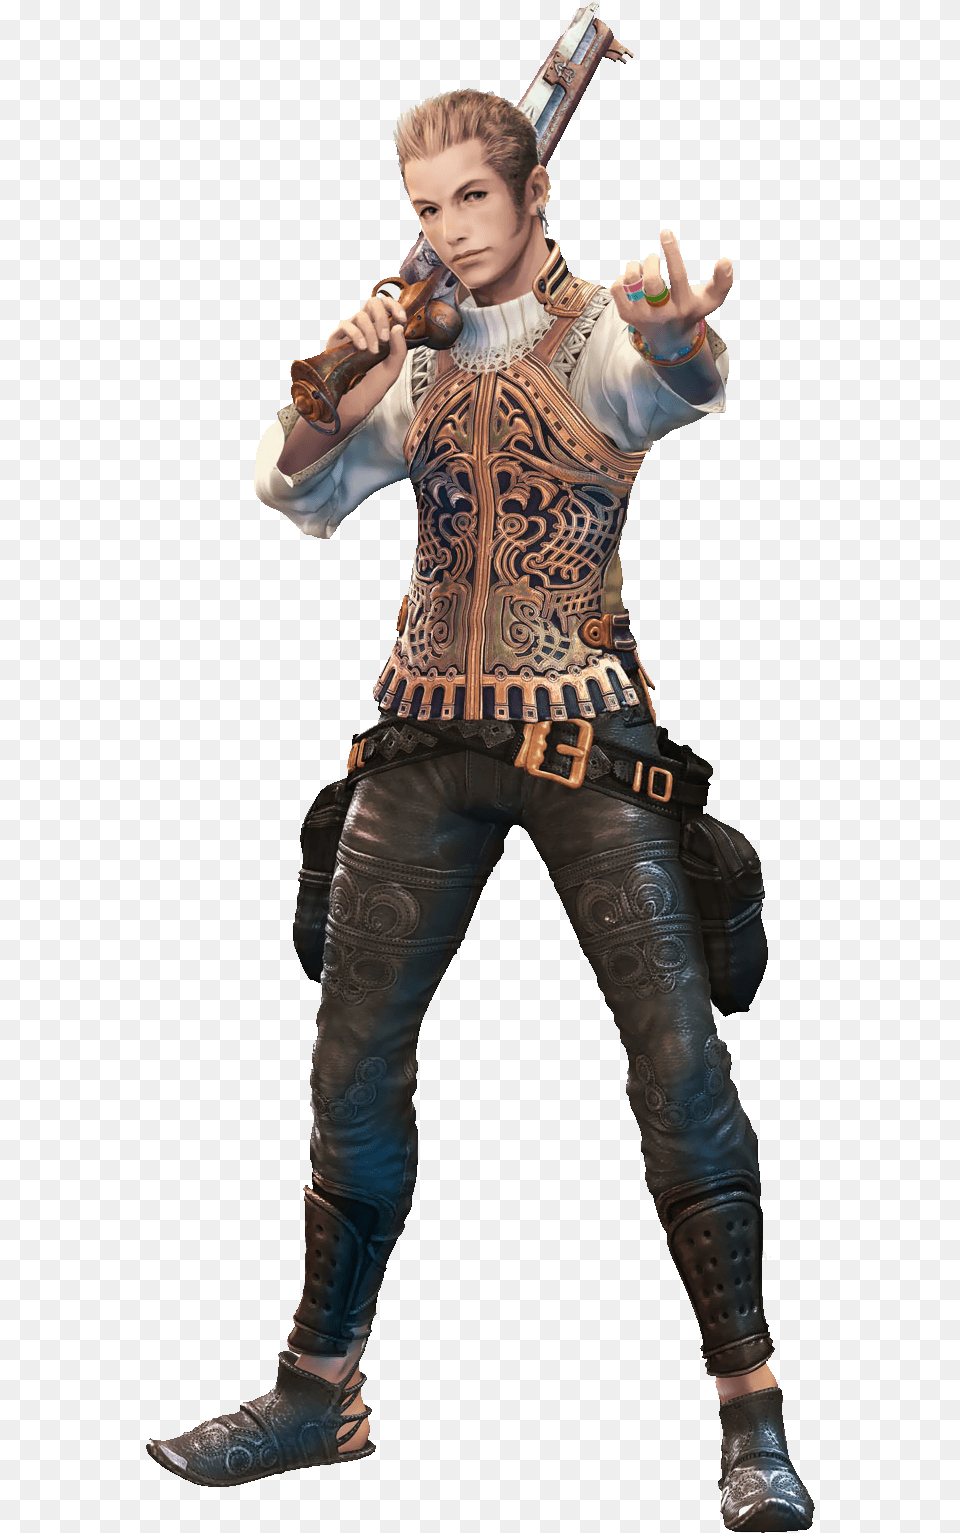 Balthierhan Solo Balthier Final Fantasy Xii, Weapon, Clothing, Costume, Sword Free Png Download